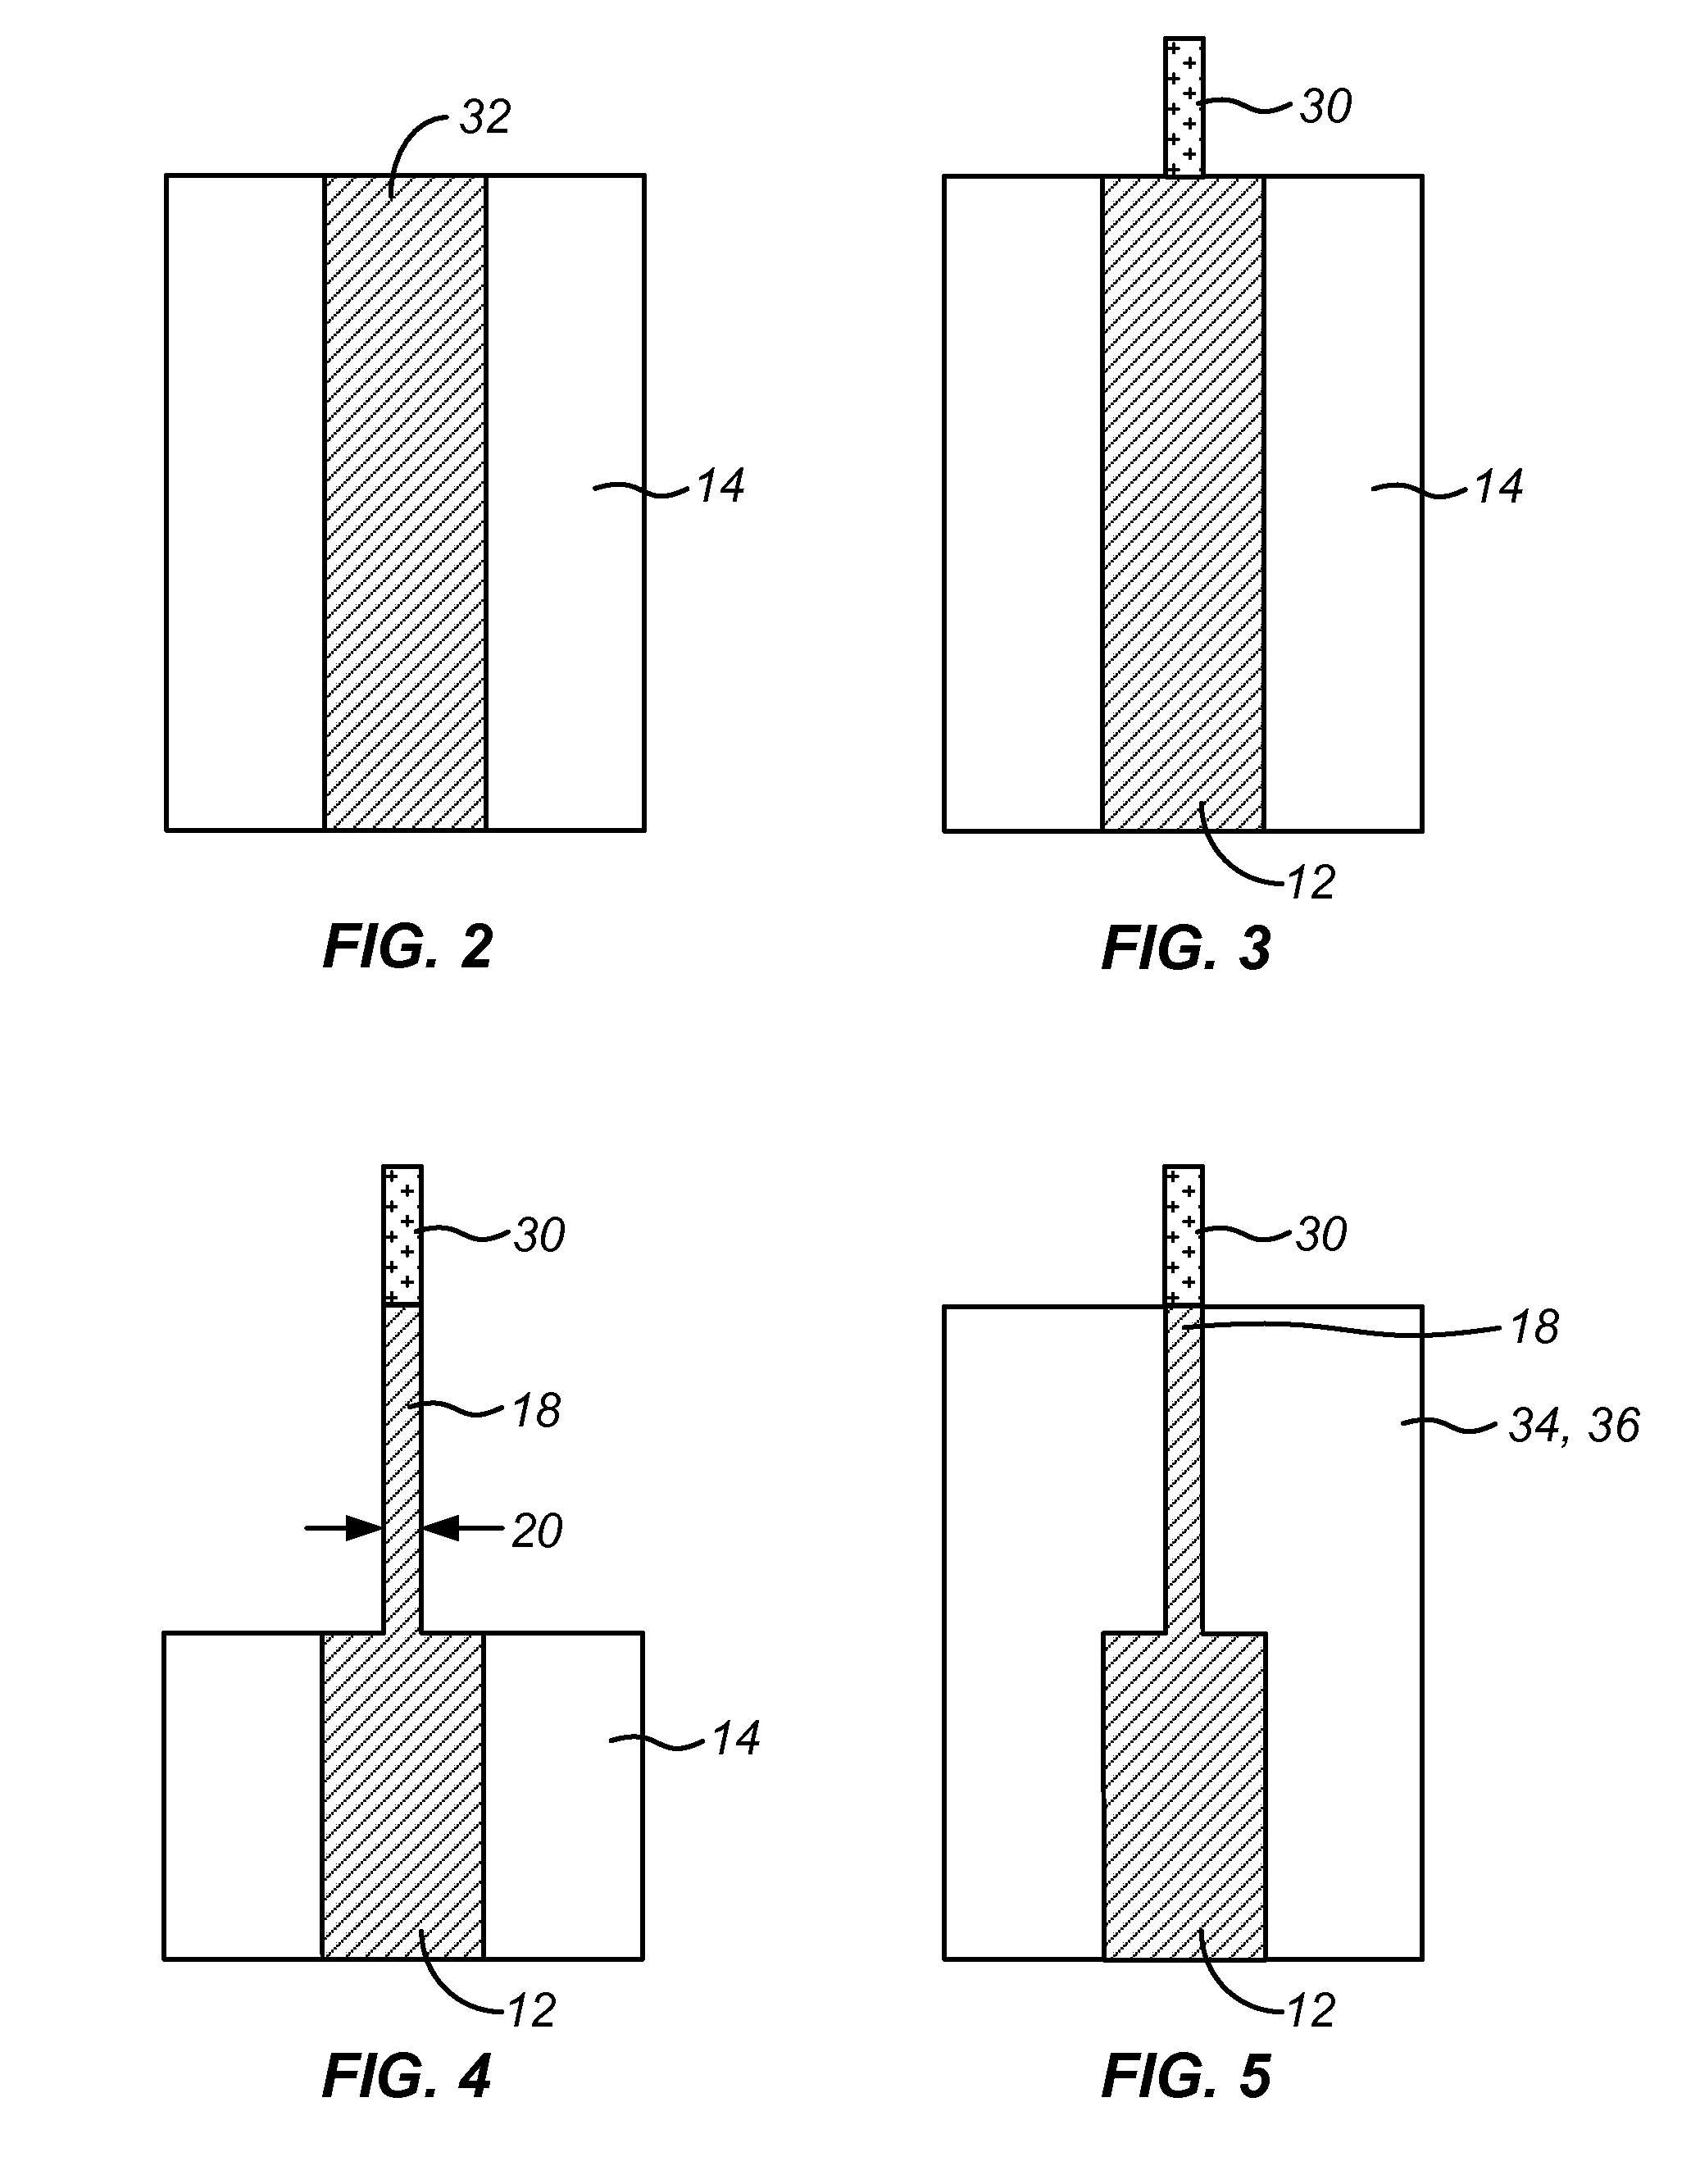 Method for making memory cell by melting phase change material in confined space